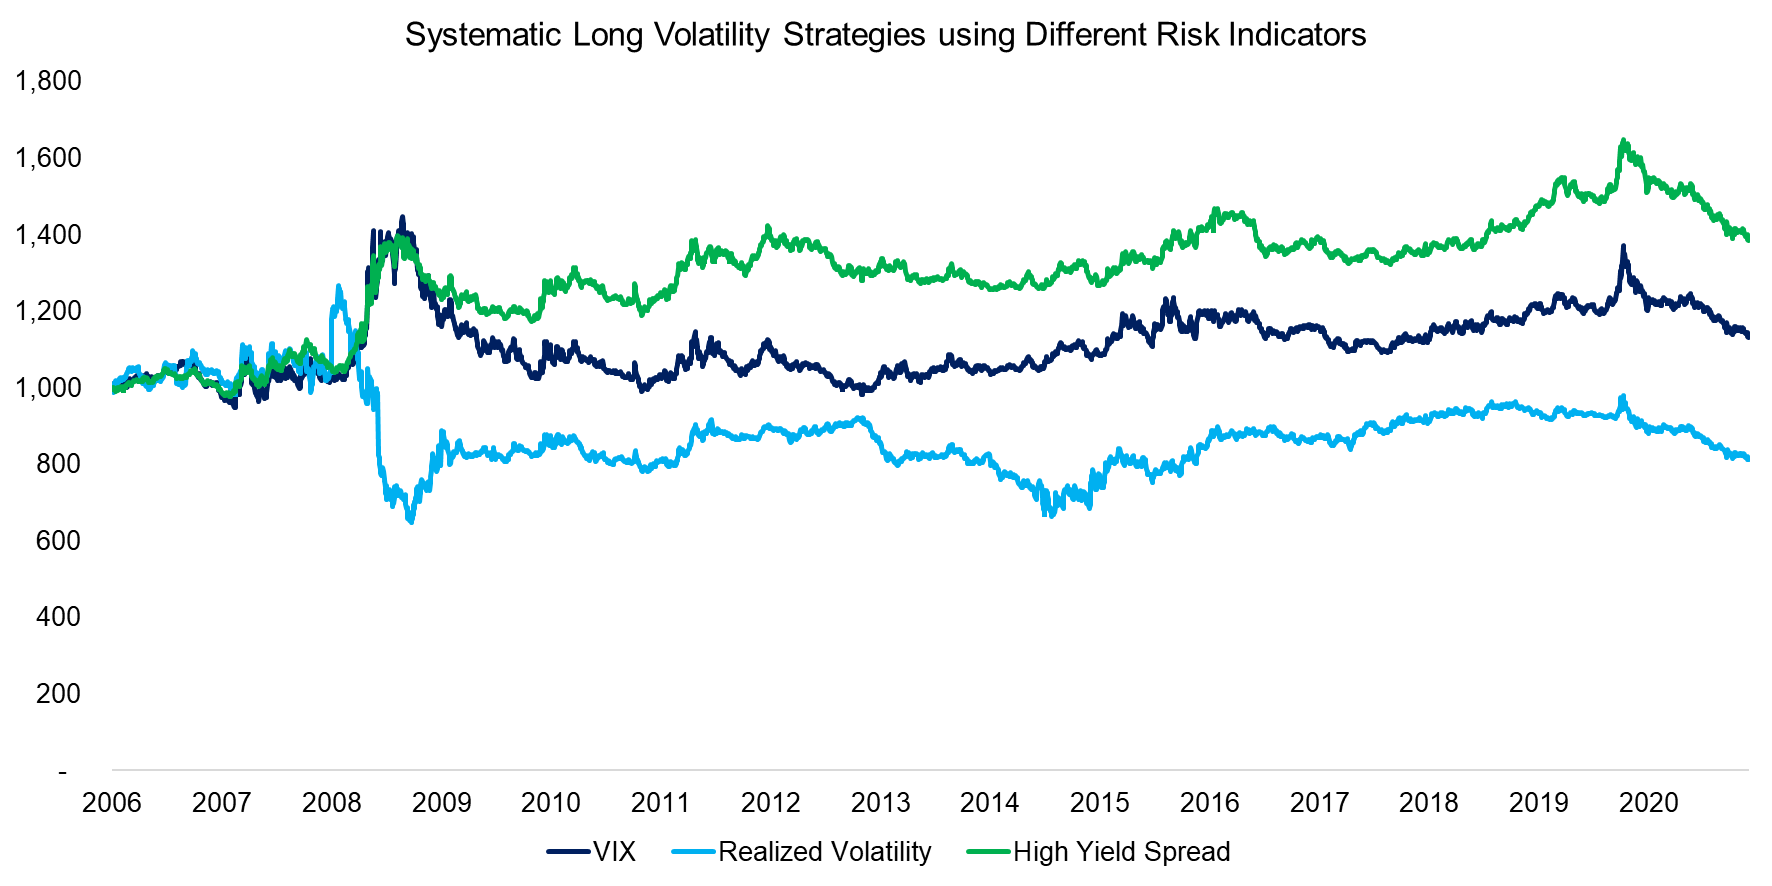 Systematic Long Volatility Strategies using Different Risk Indicators